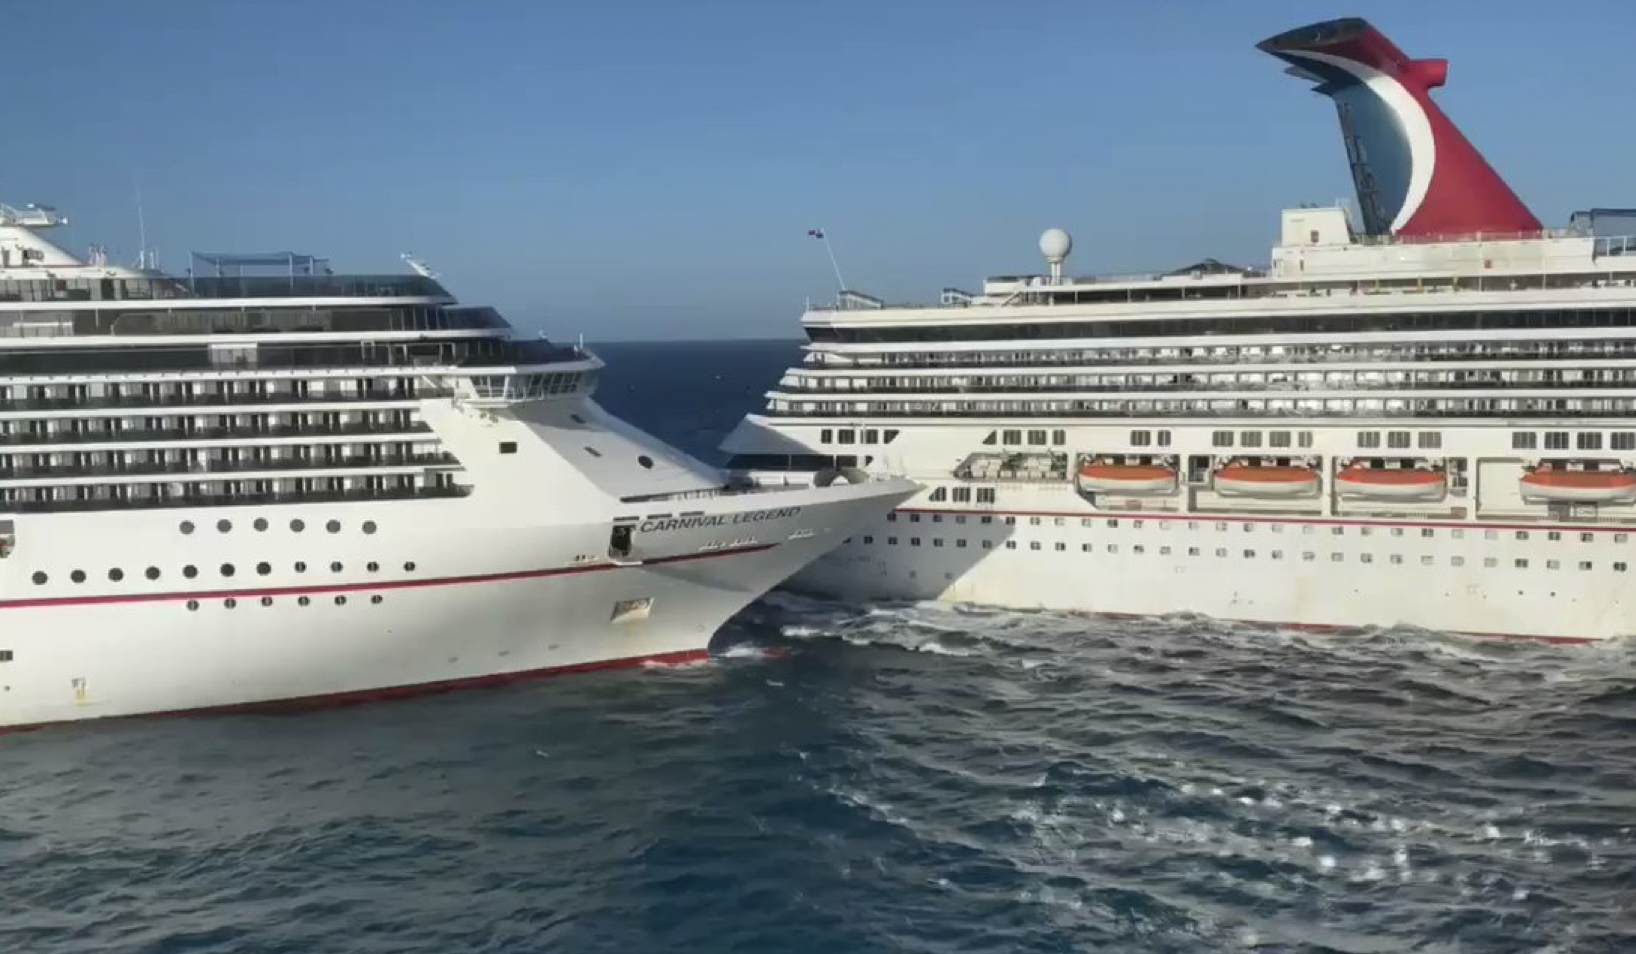 Carnival Legend and Carnival Glory